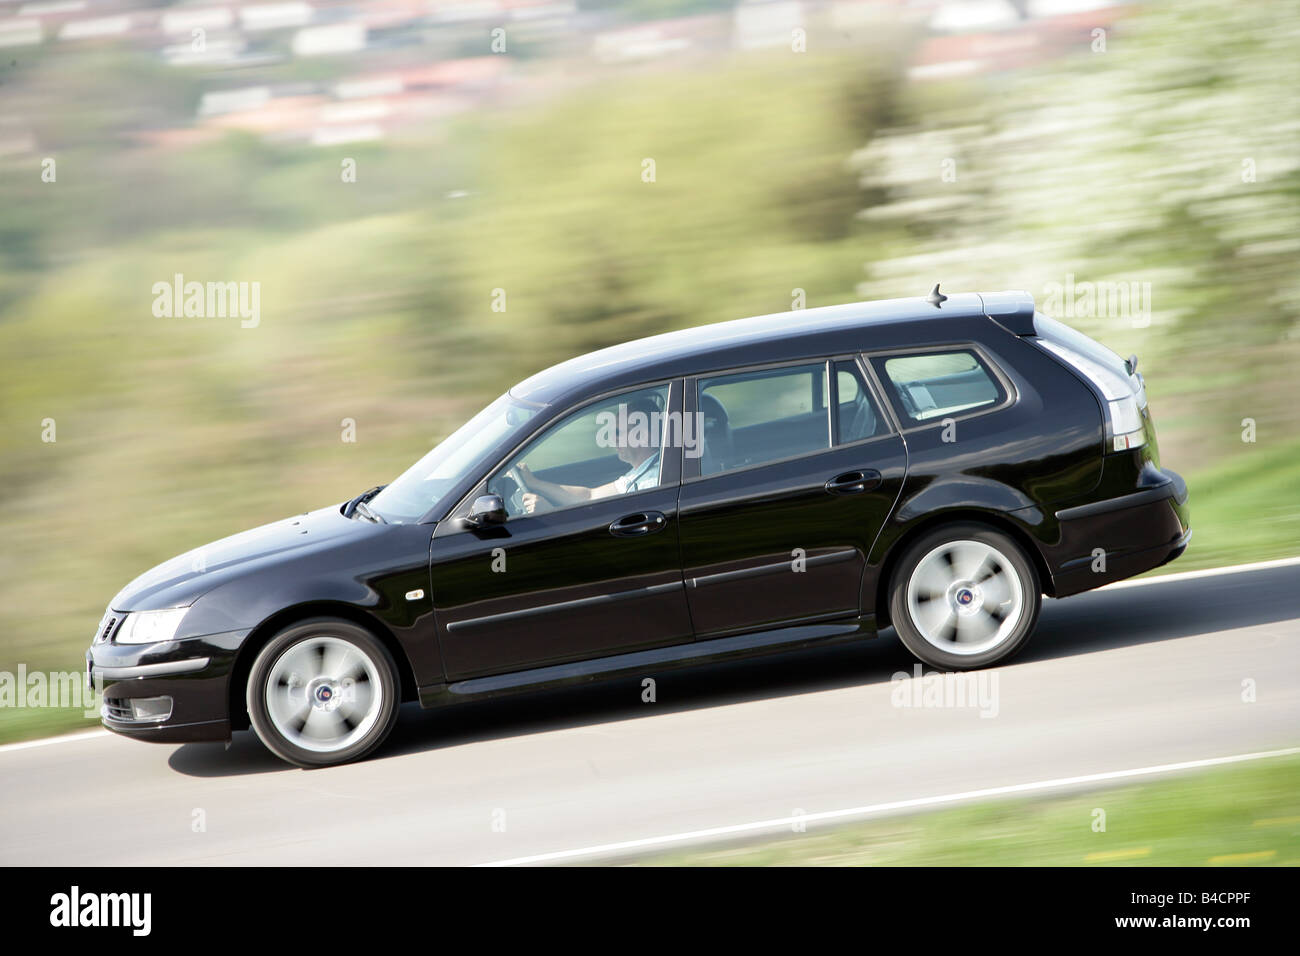 Saab 9-3 1.8t Sport Combi, model year 2006-, black, driving, side view, country road Stock Photo